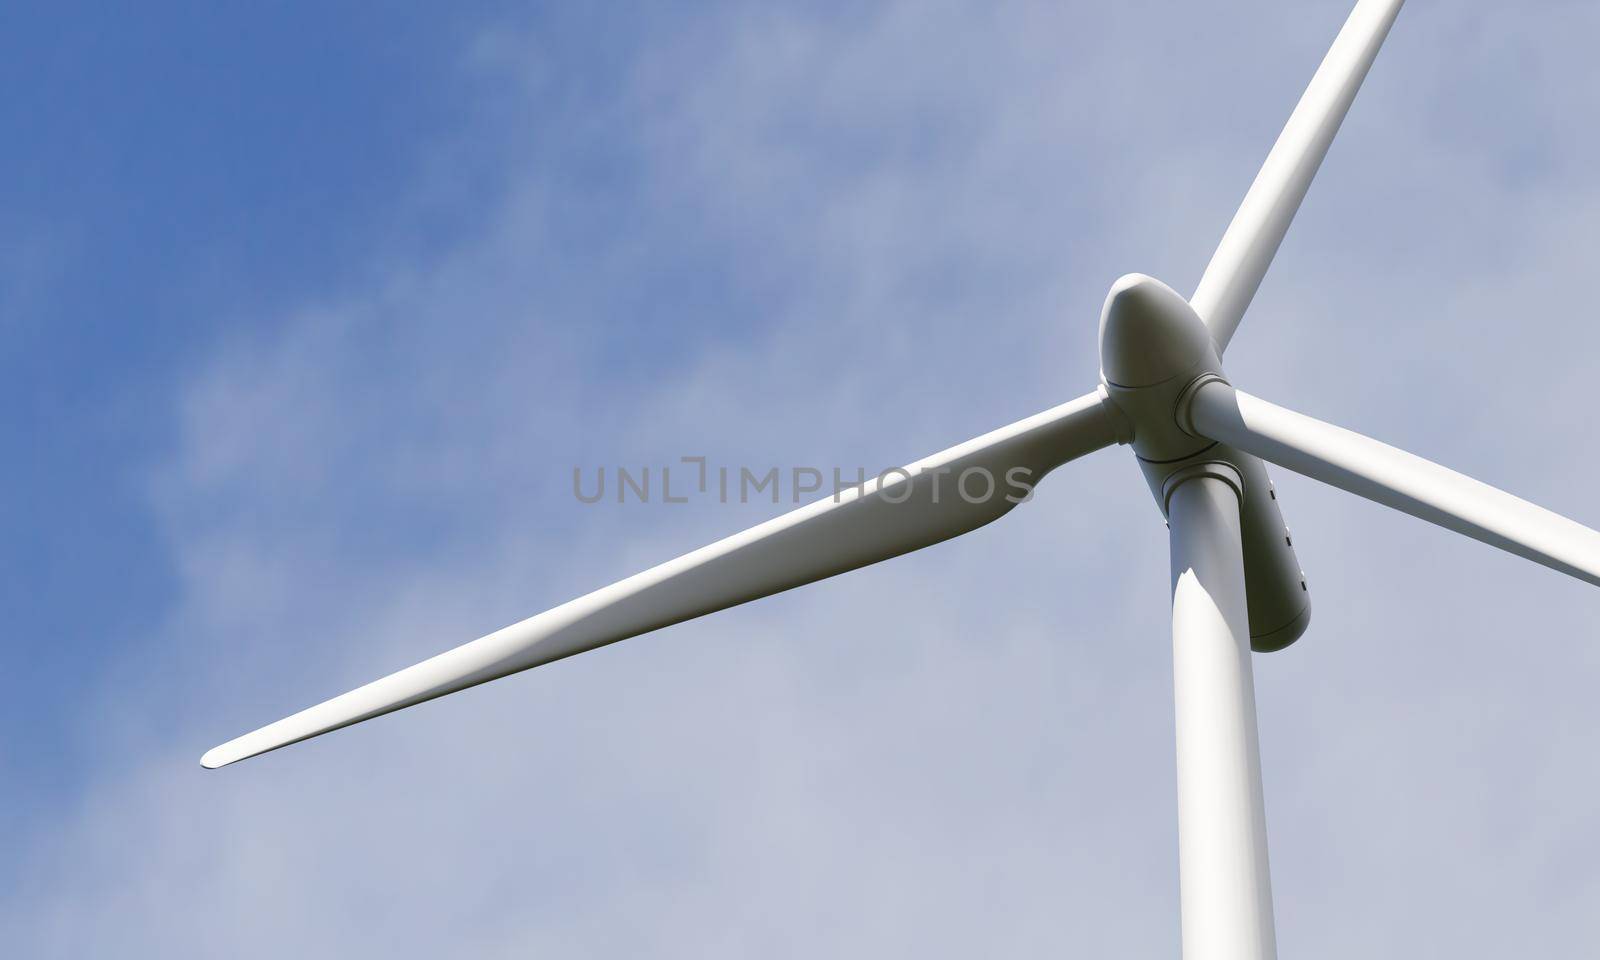 Wind turbine spinning to generate electricity for households. clean and sustainable energy concept. 3D illustration rendering